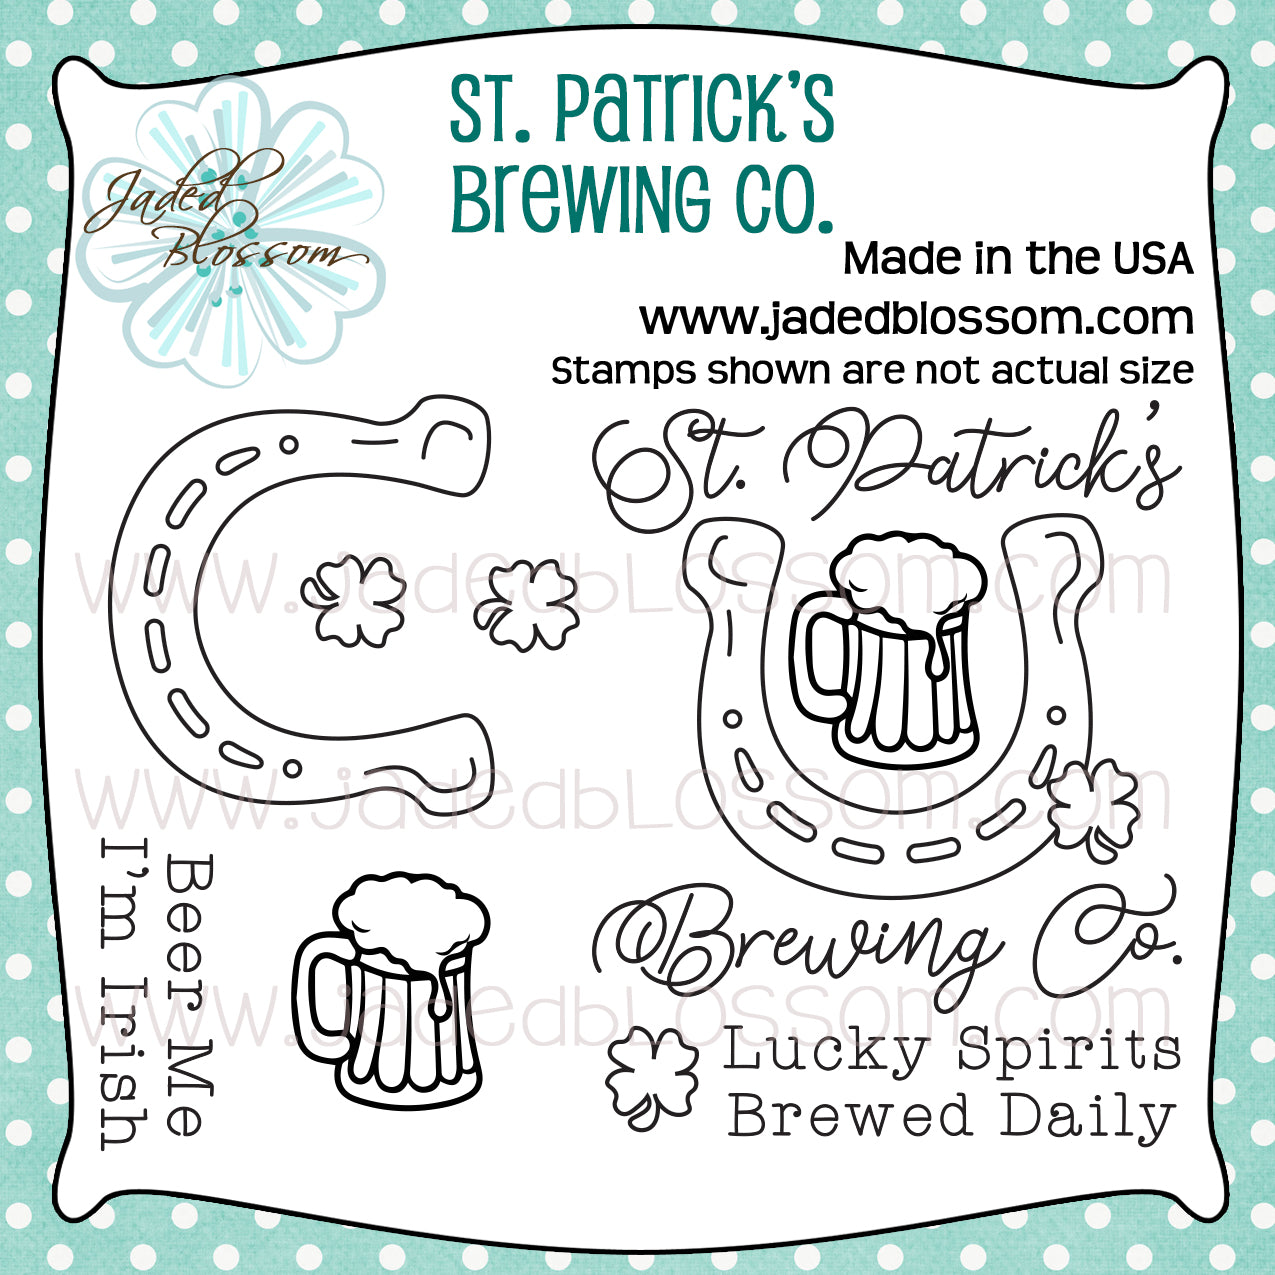 St. Patricks Day Brewing Co